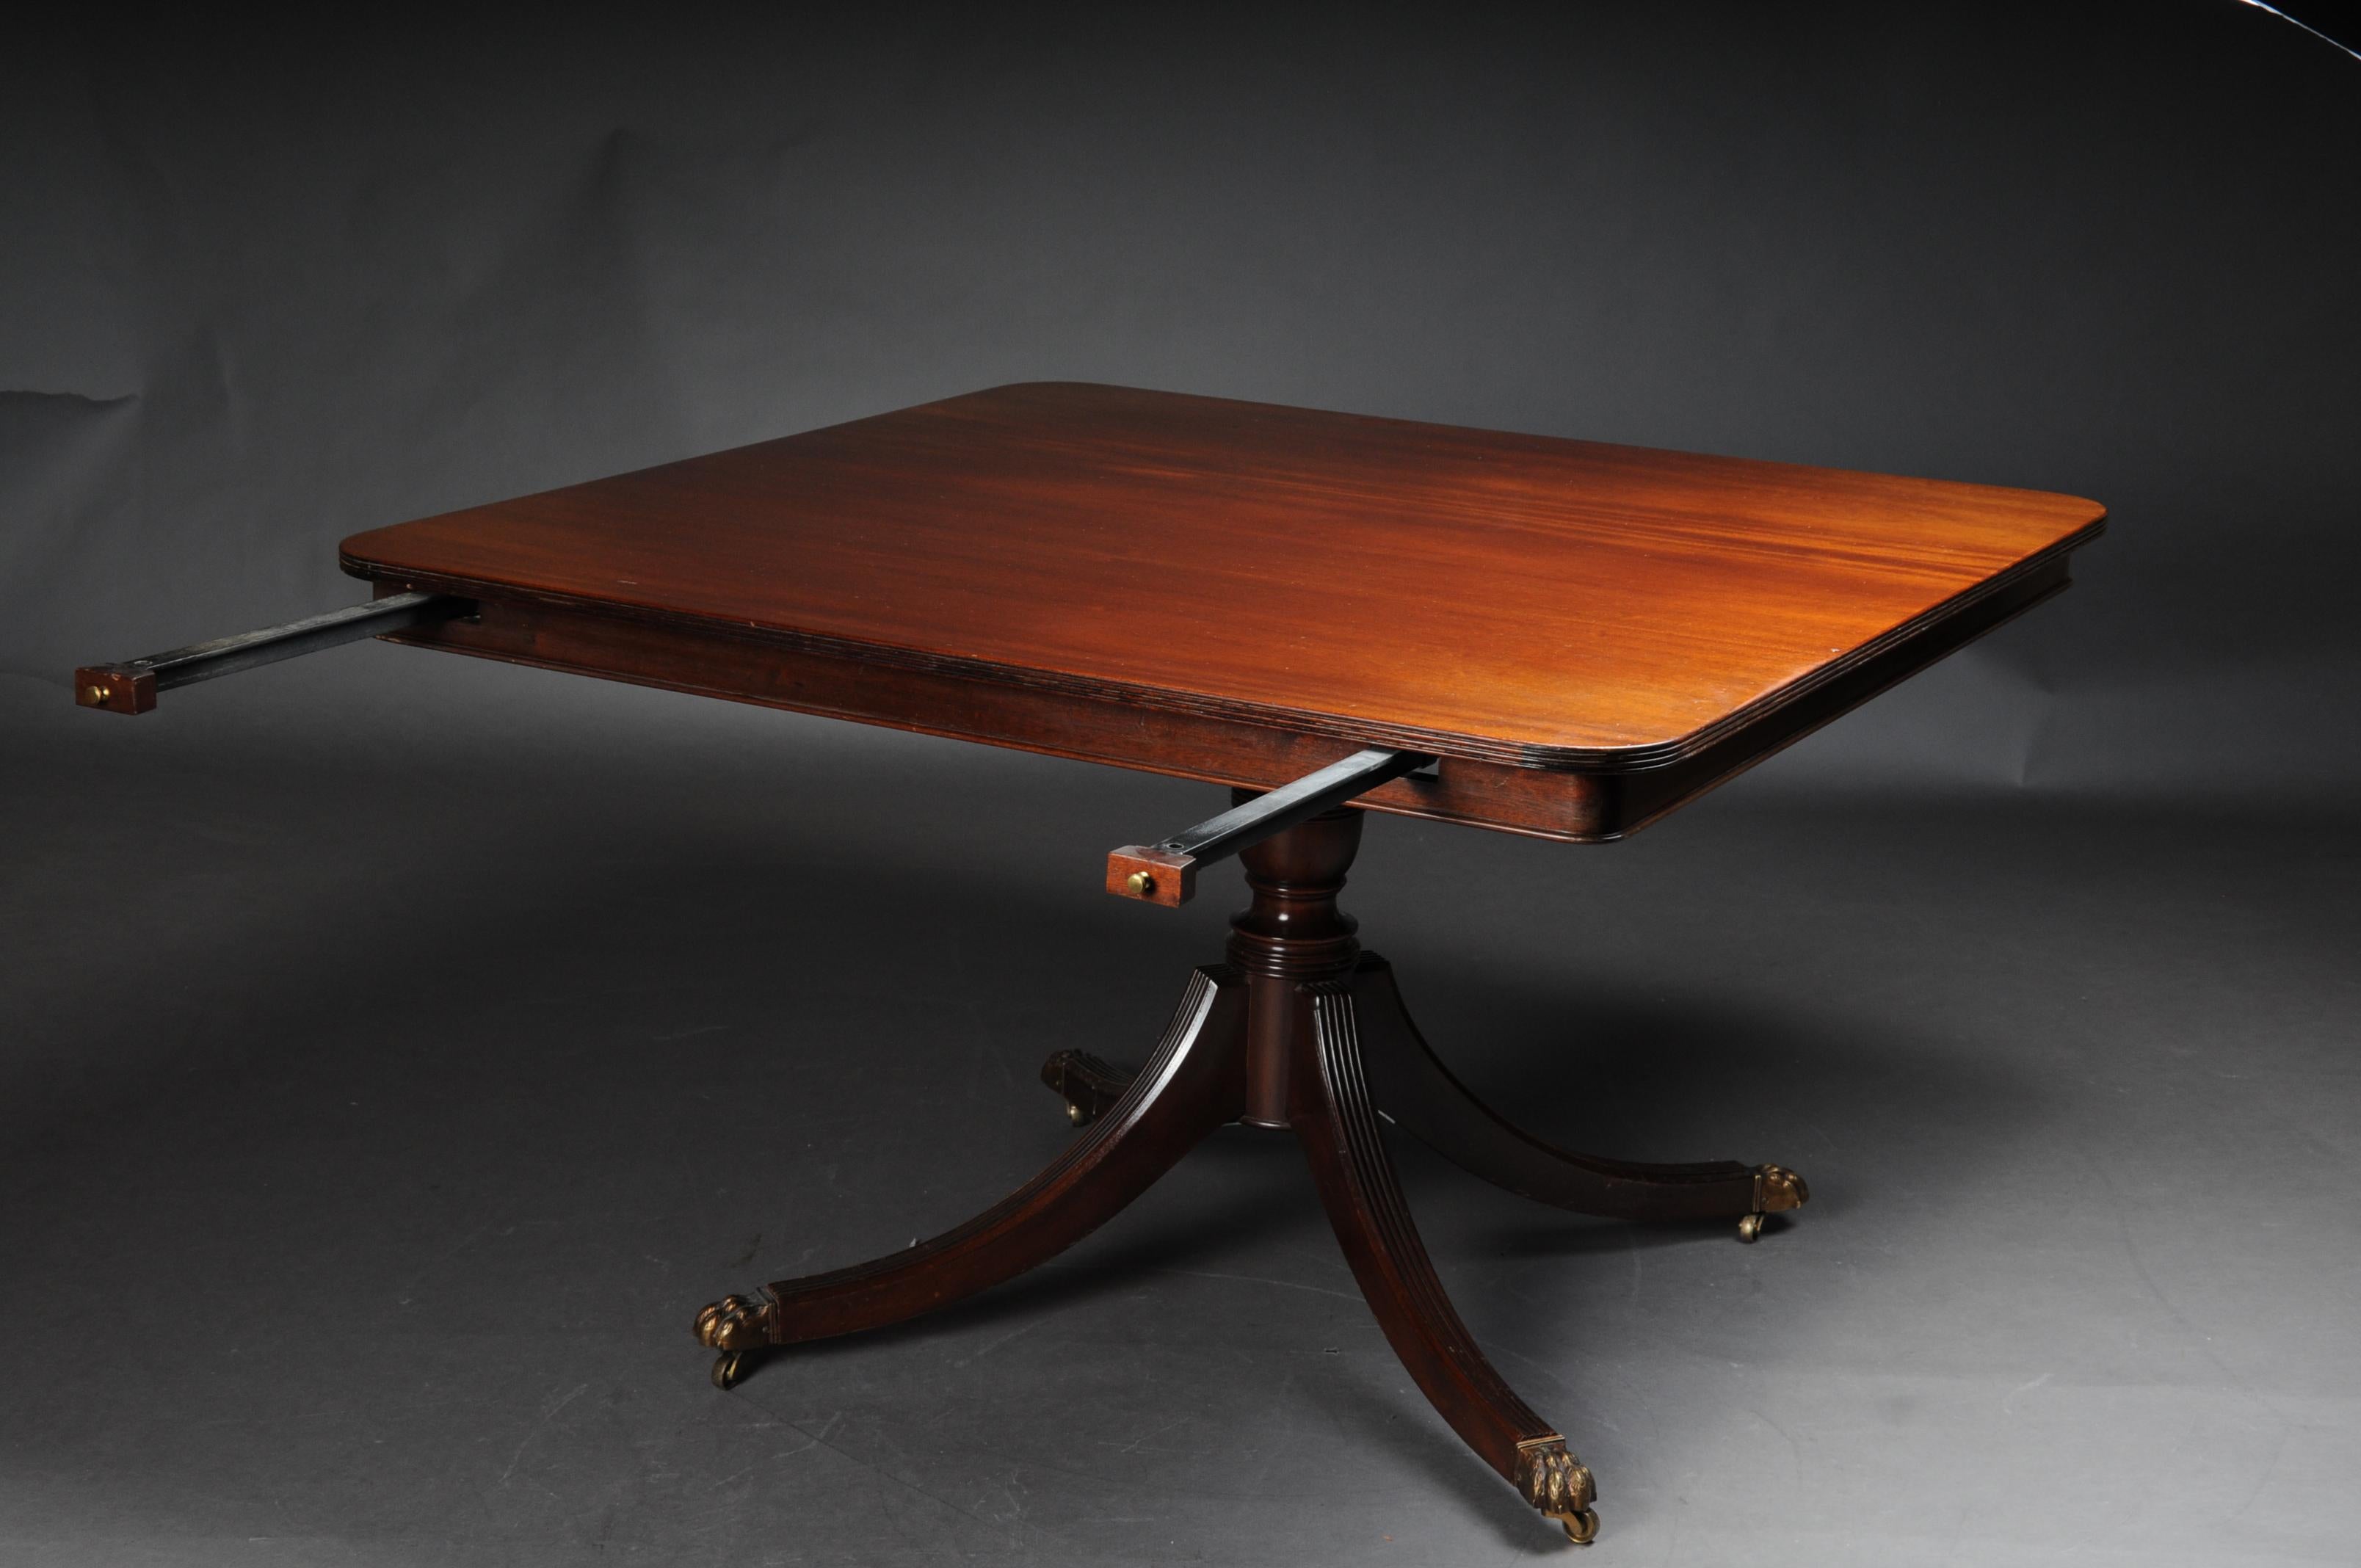 English dining table / table, mahogany, Victorian - extendible

Victorian table made of solid mahogany, England, 20th century
2 table tops available (see pictures).
Tabletop on four paws shaped bronze feet which are equipped with wheels. In the shop